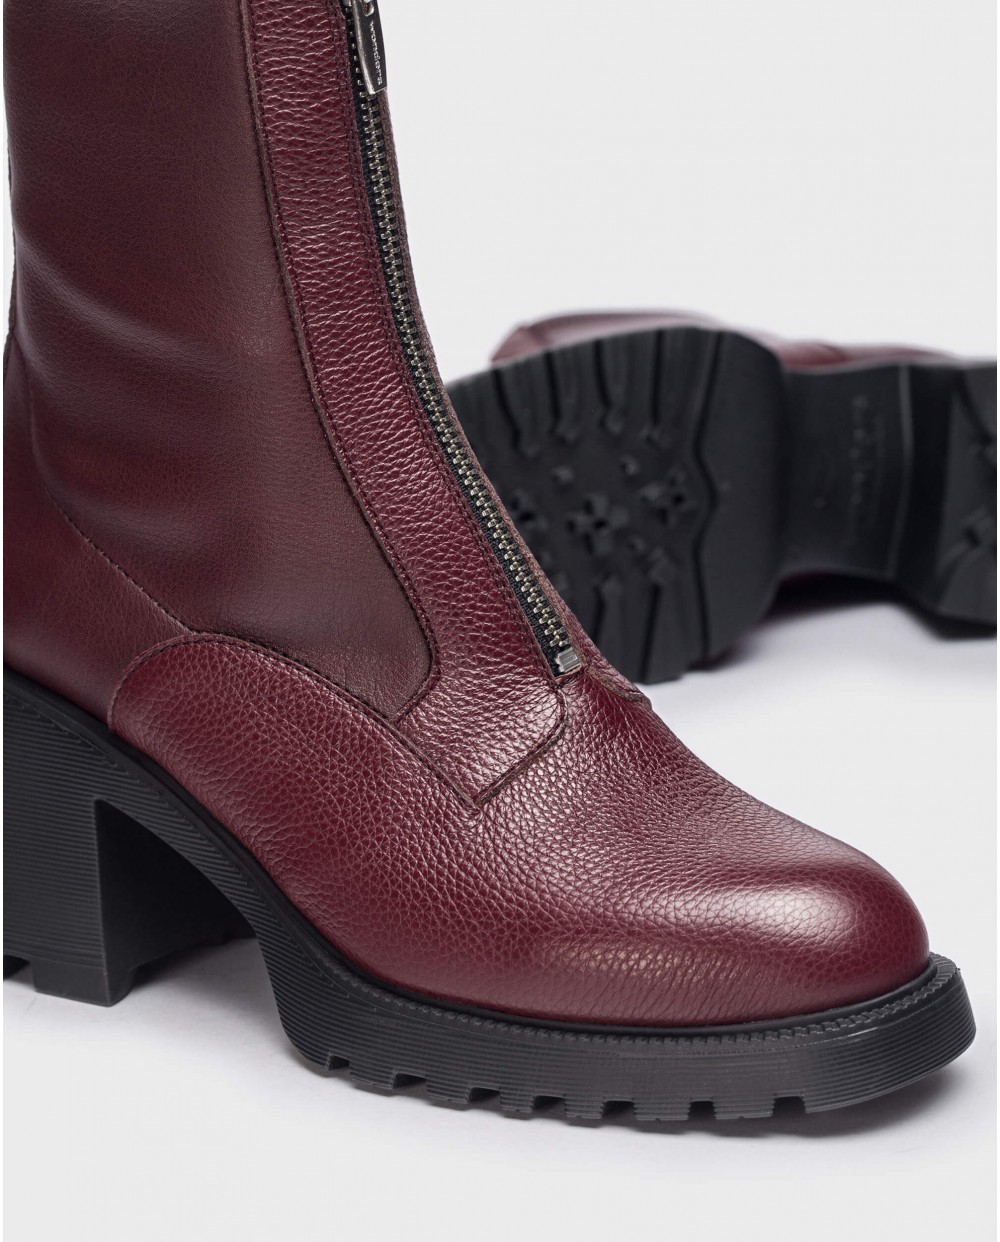 Wonders-Ankle Boots-Burgundy KID ankle boot